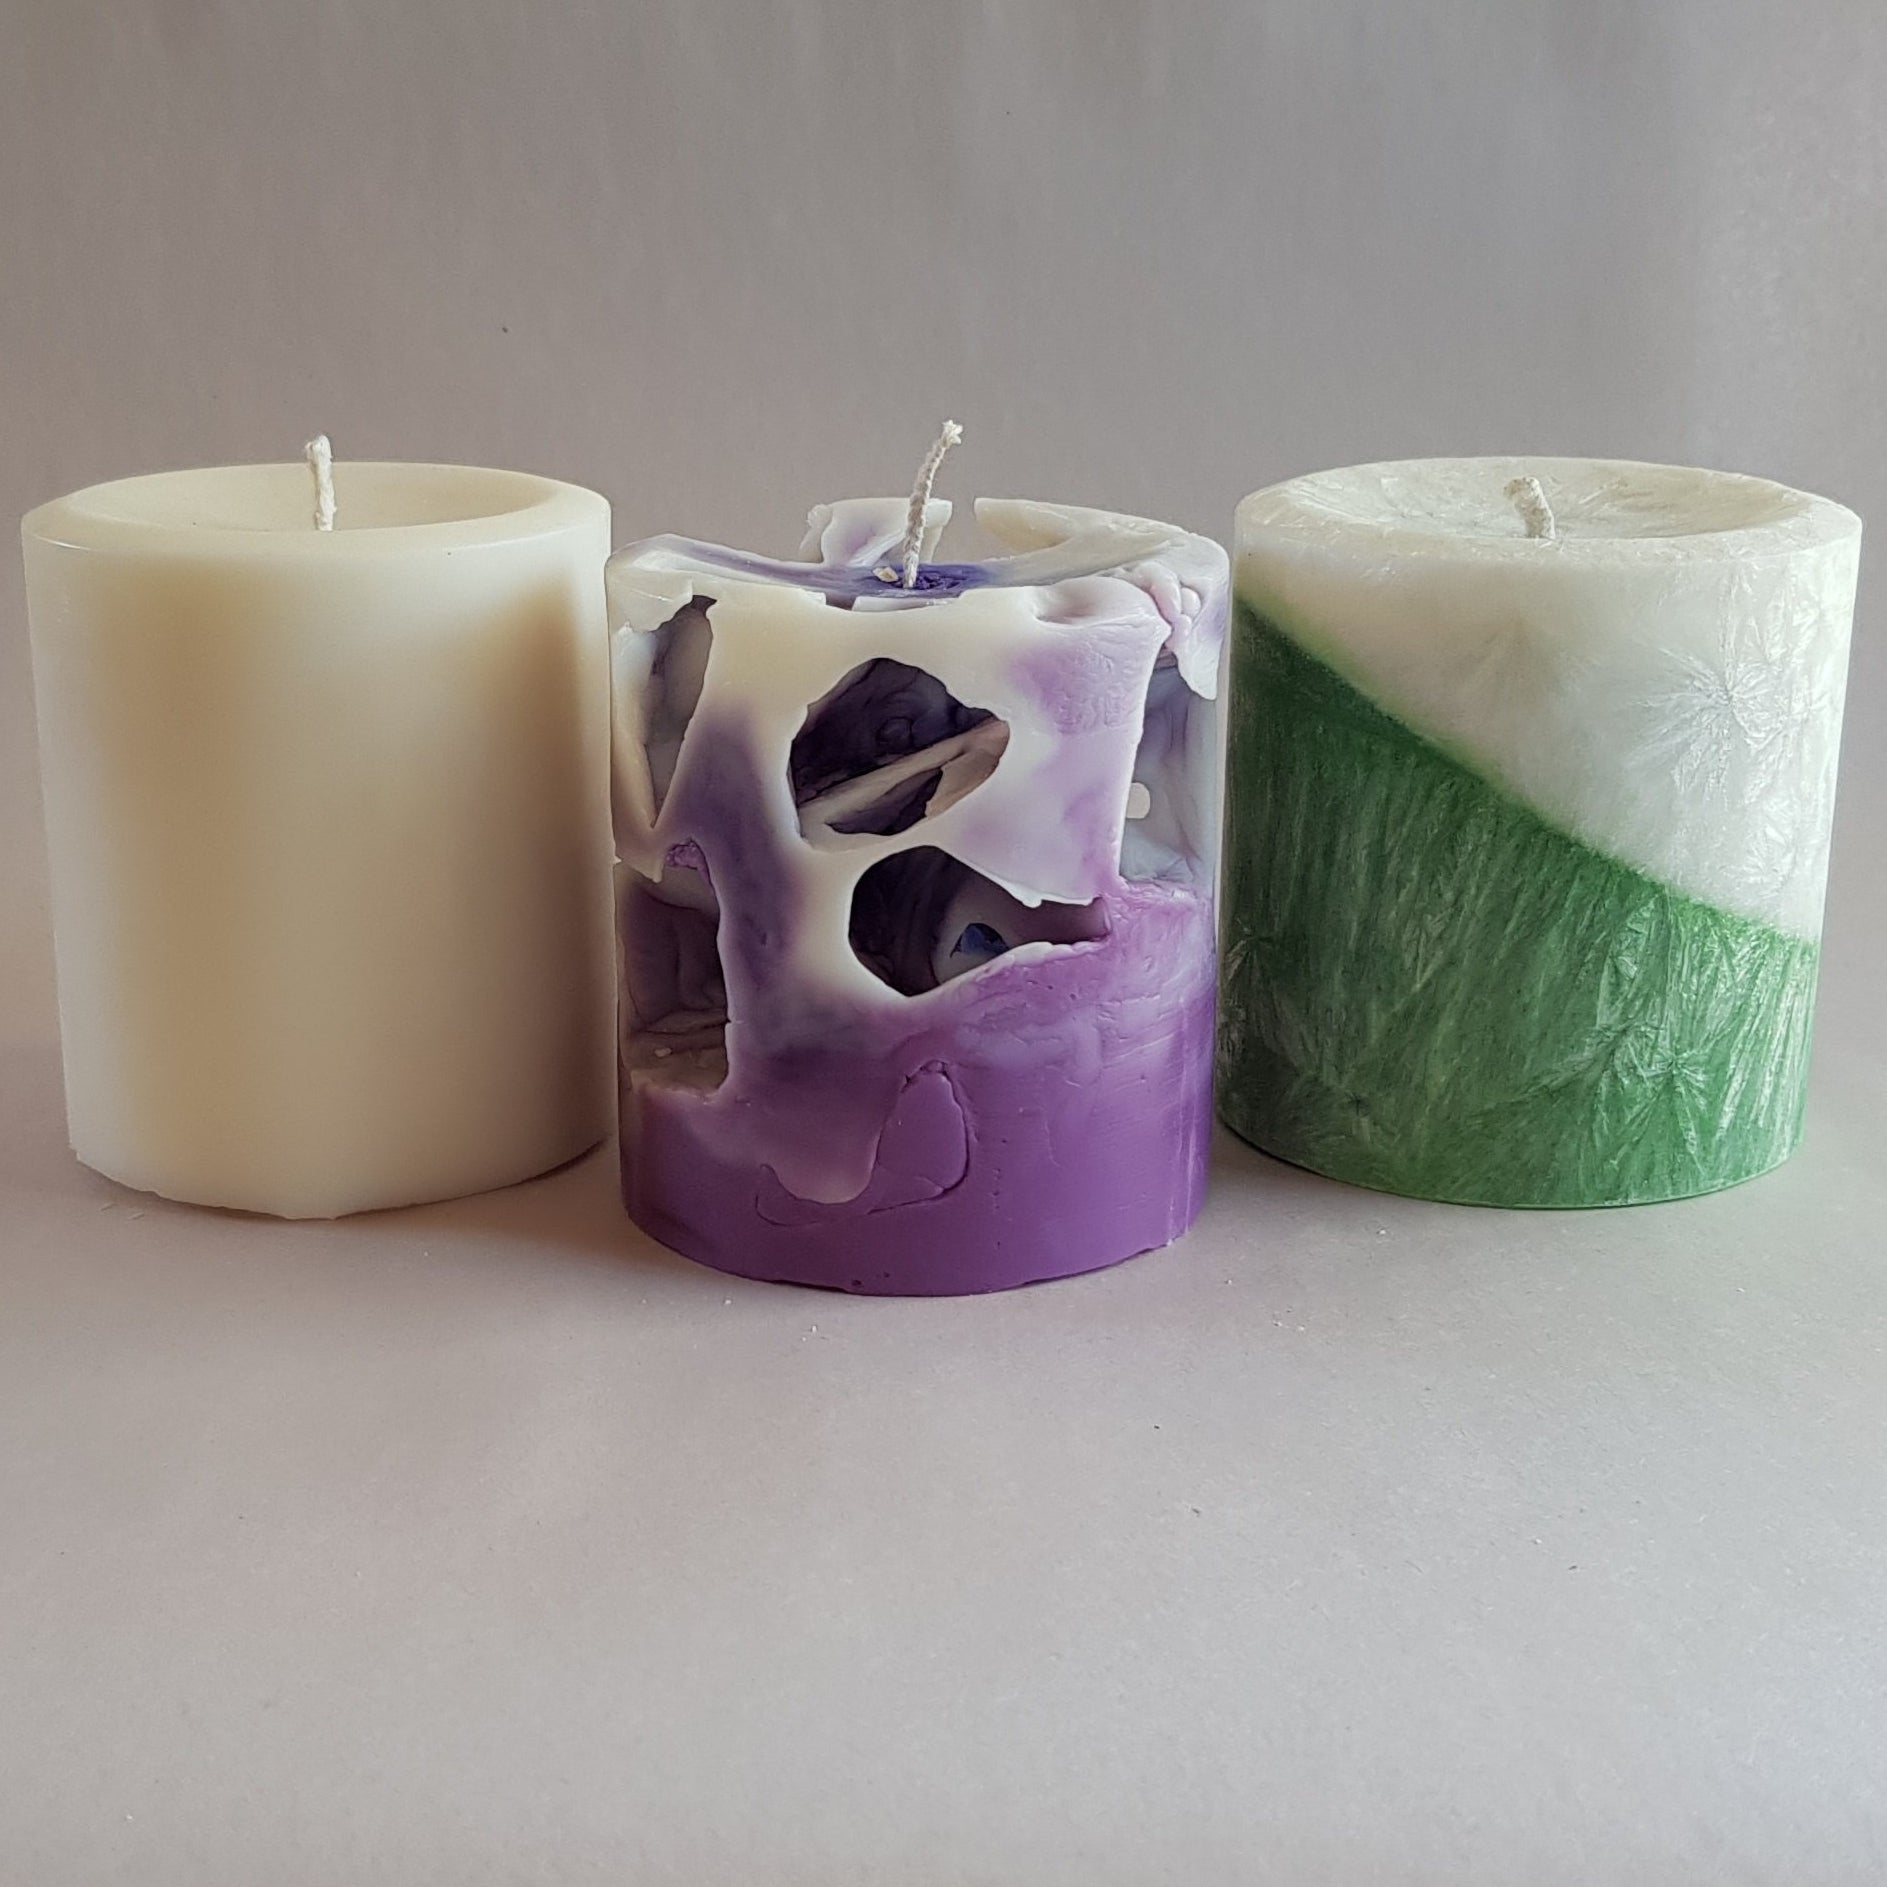 Decorative candles, Candle sculpture, Carving candles, Candle making DIY,  Candles crafting